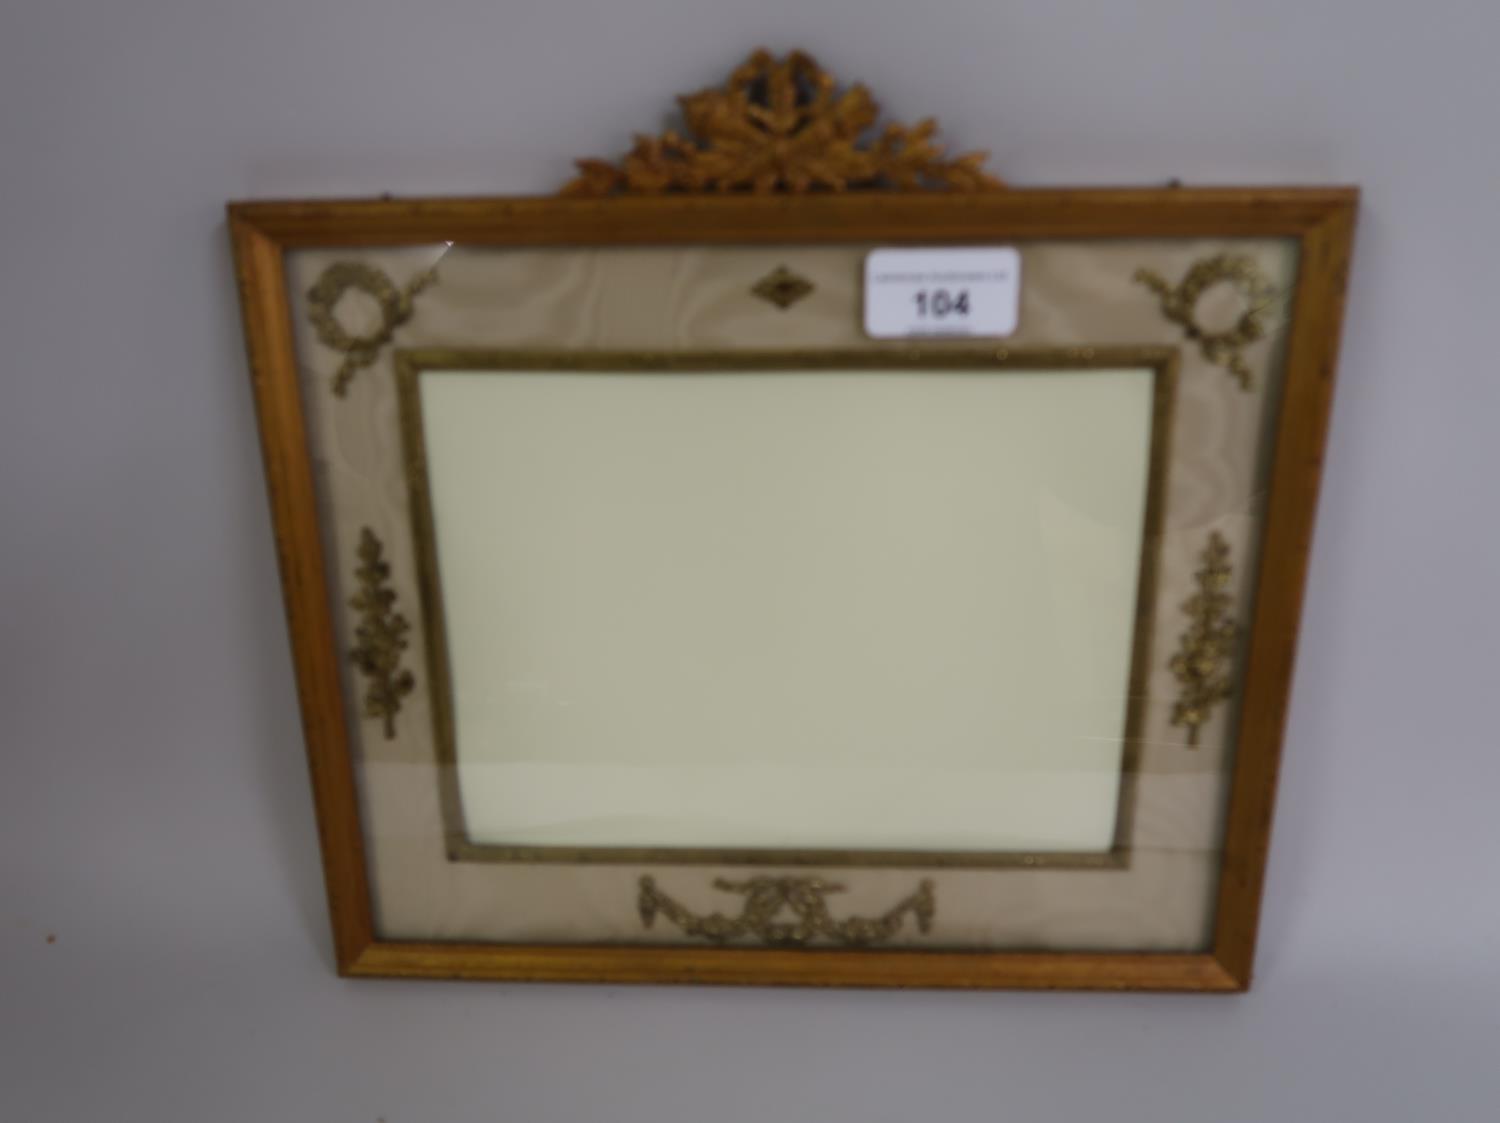 Late 19th / early 20th Century French gilt metal photograph frame with swag and torch surmount